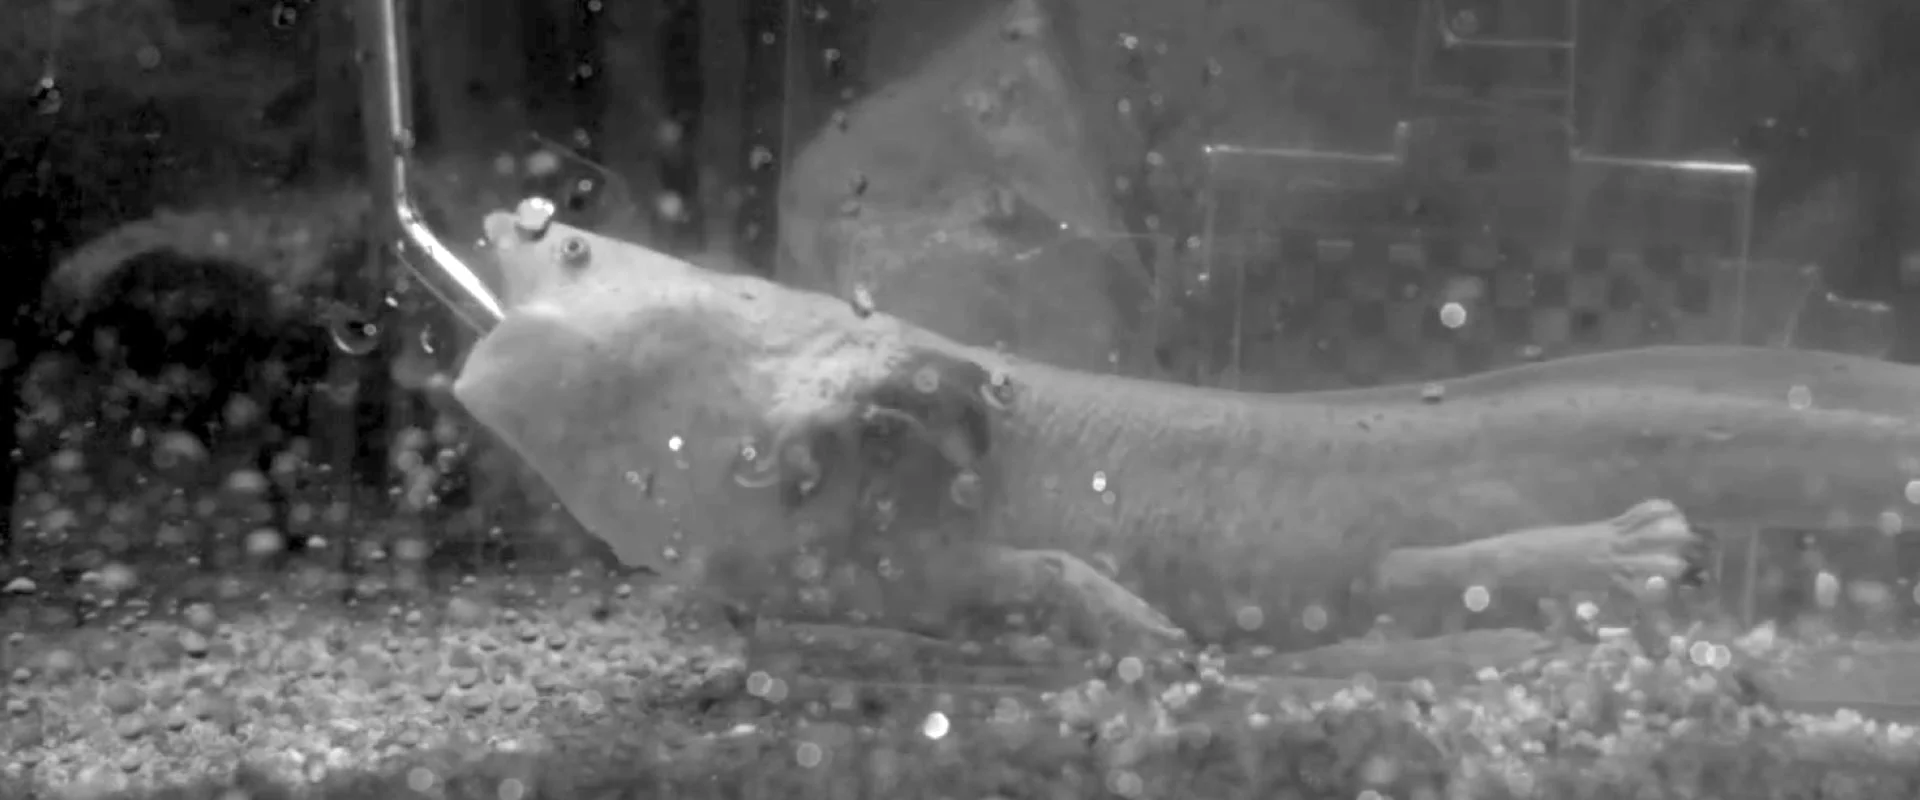 Still image from a video of an adult Lake Patzcuaro salamander eating a worm